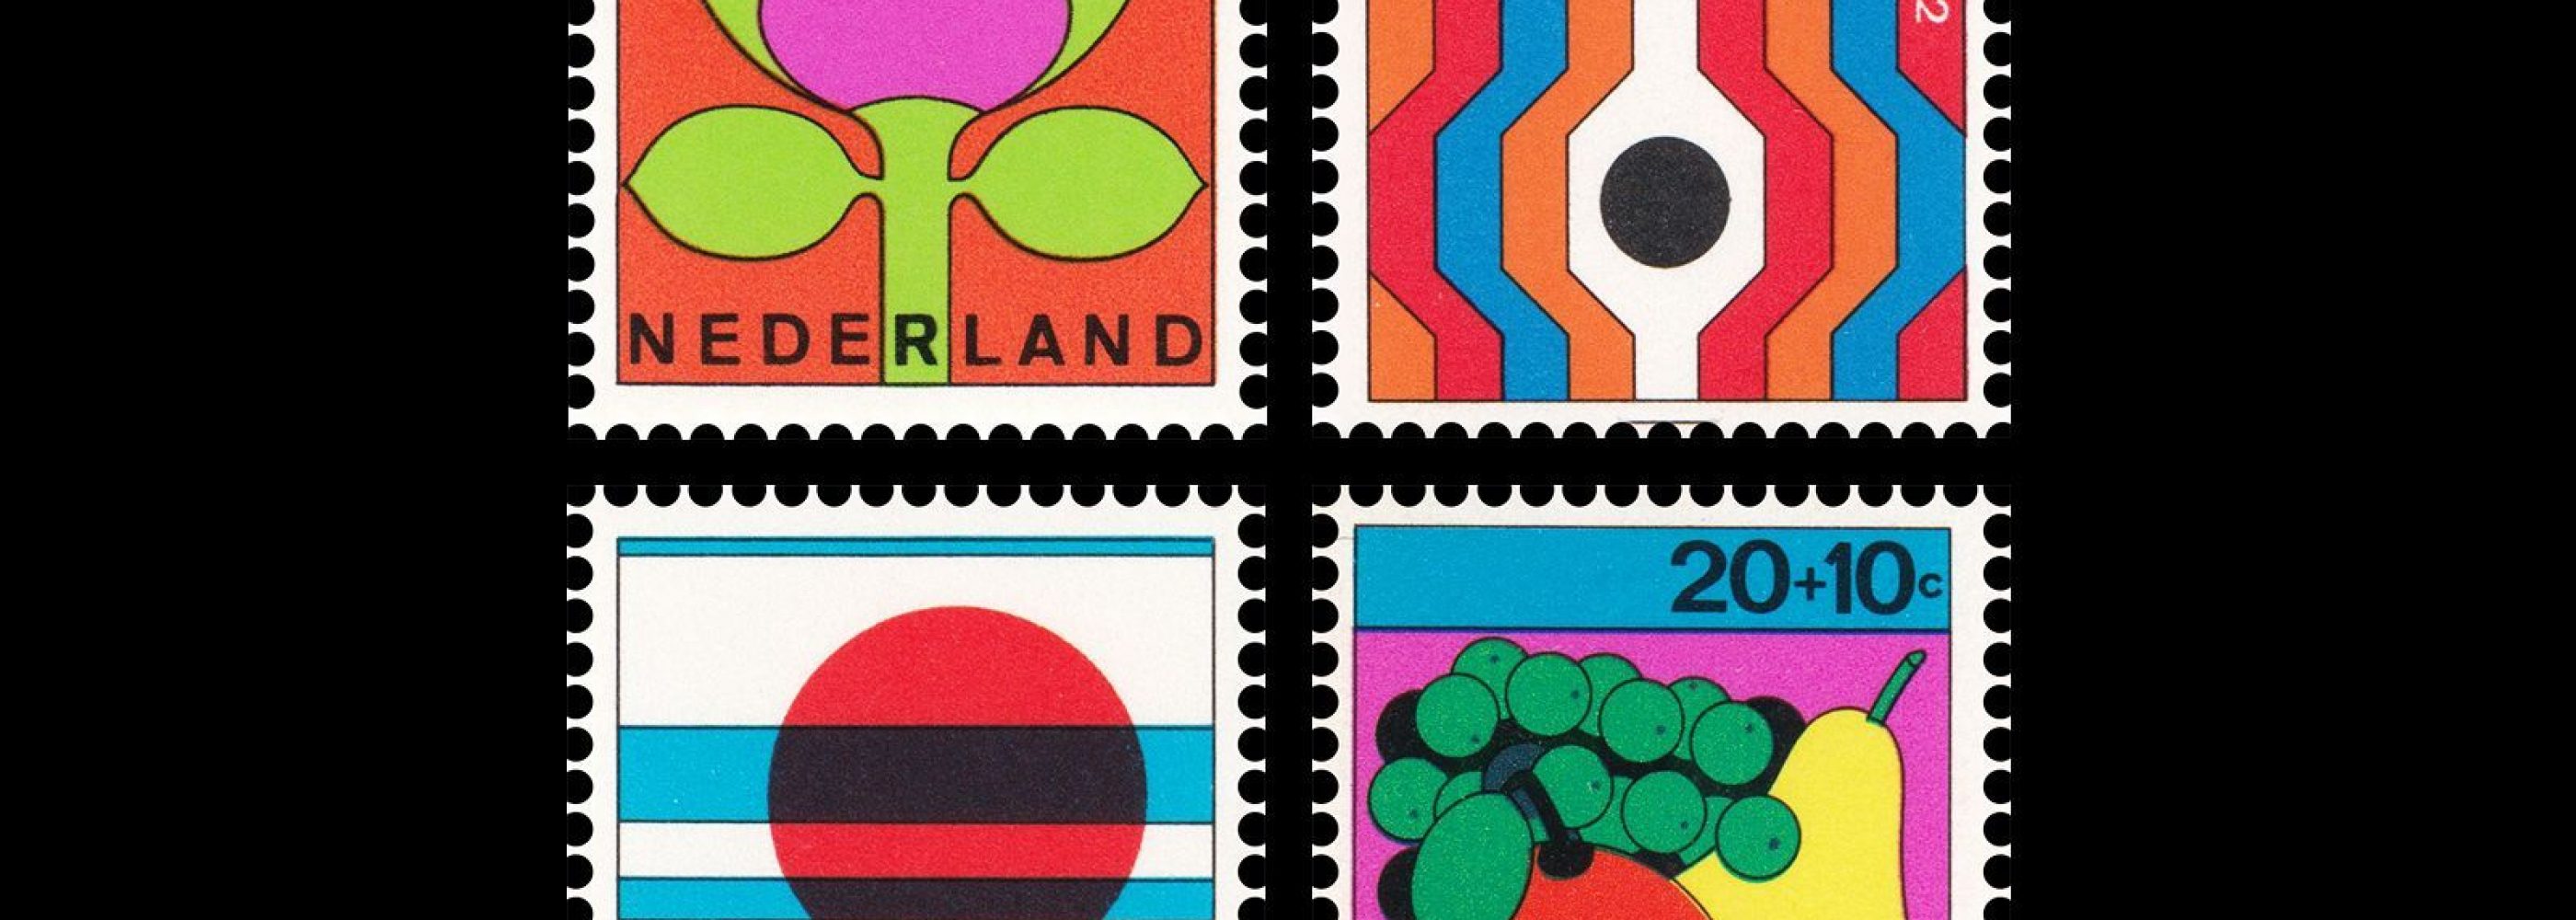 Holland Festival 72 / Floriade 72, Netherland Stamps, 1972. Designed by Dick Elffers